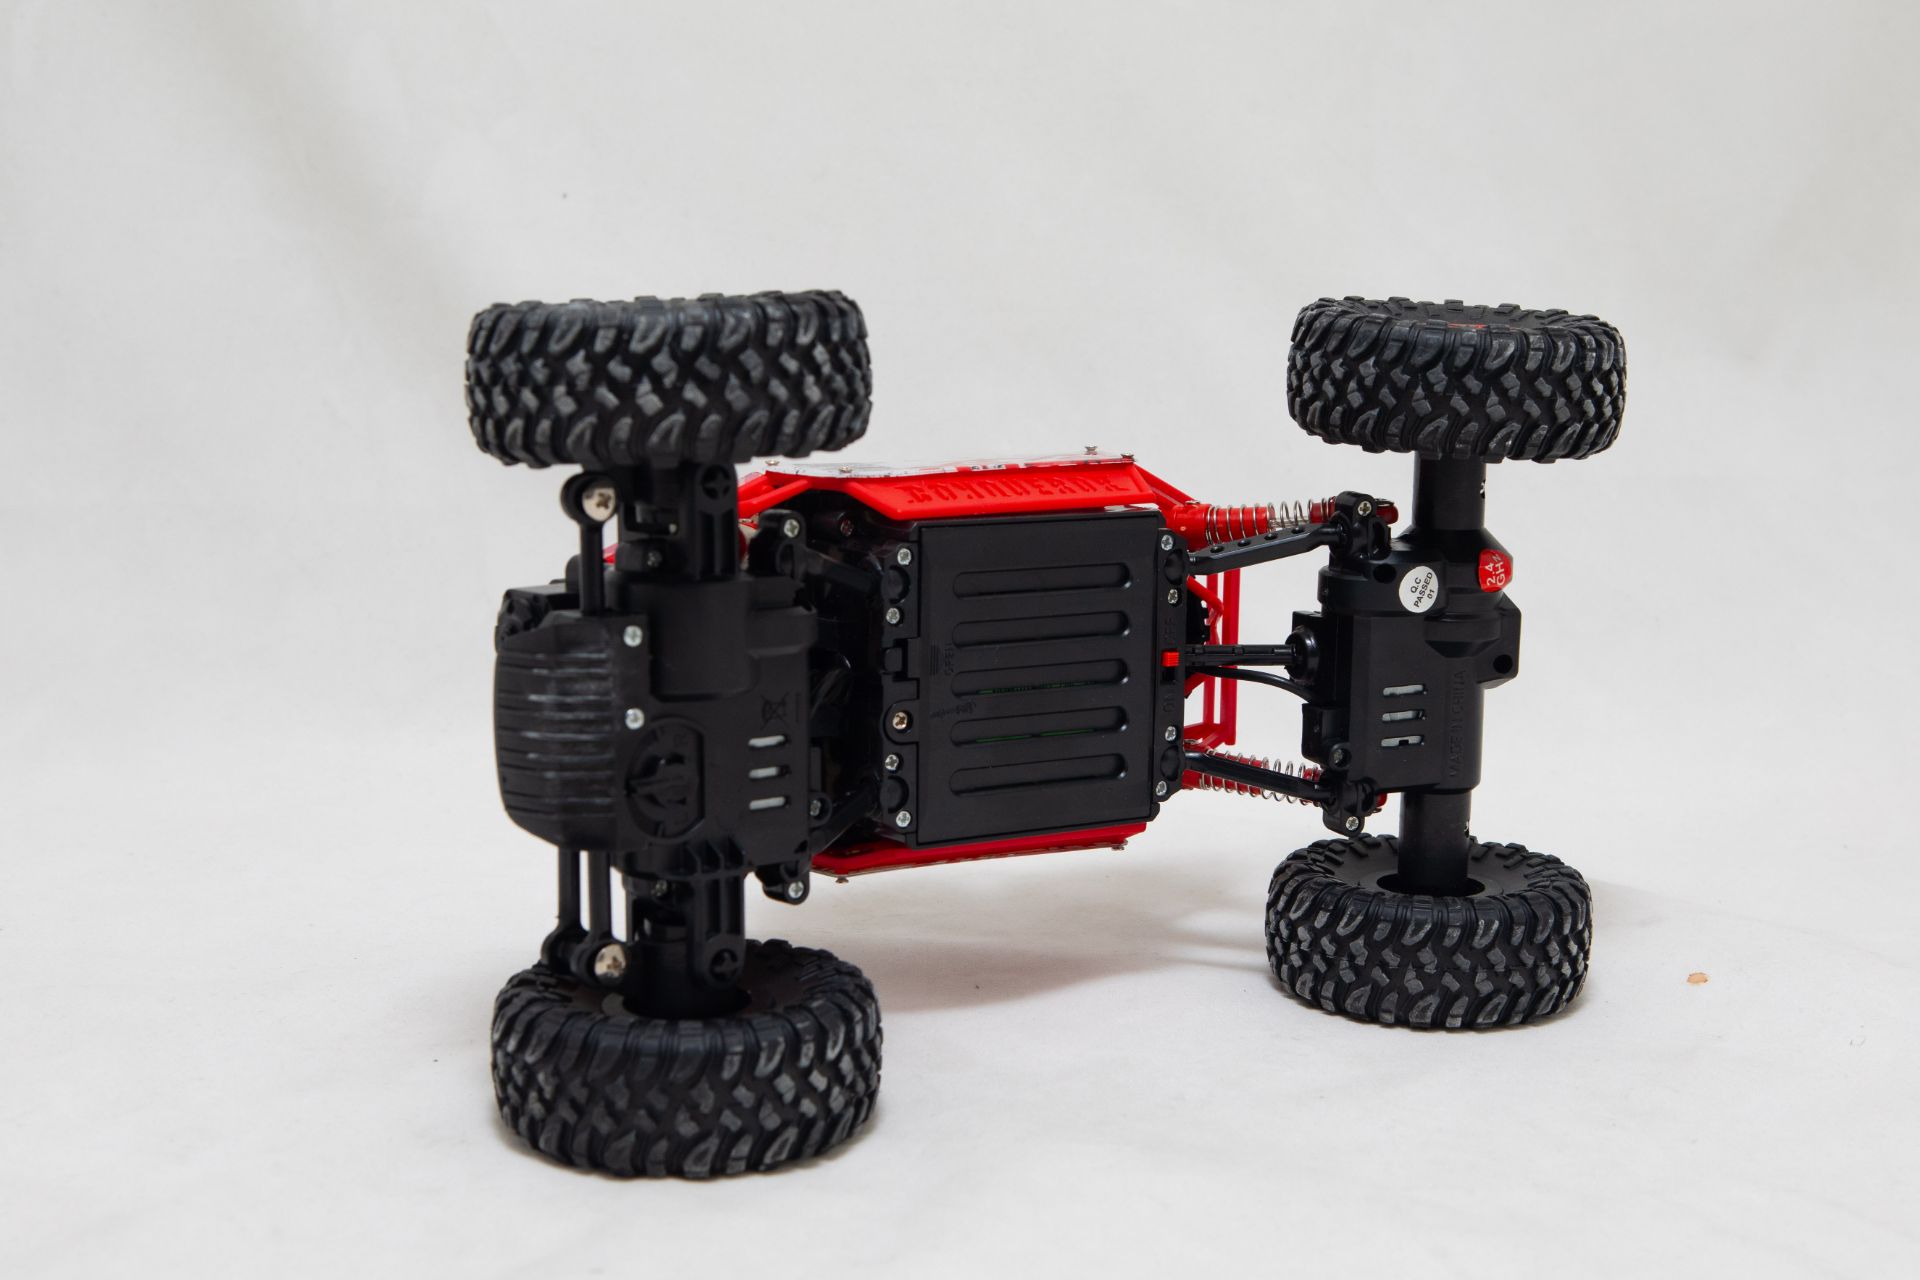 18 X ROCK CRAWLER - REMOTE CONTROL OFF ROAD TRUCK - Image 8 of 9